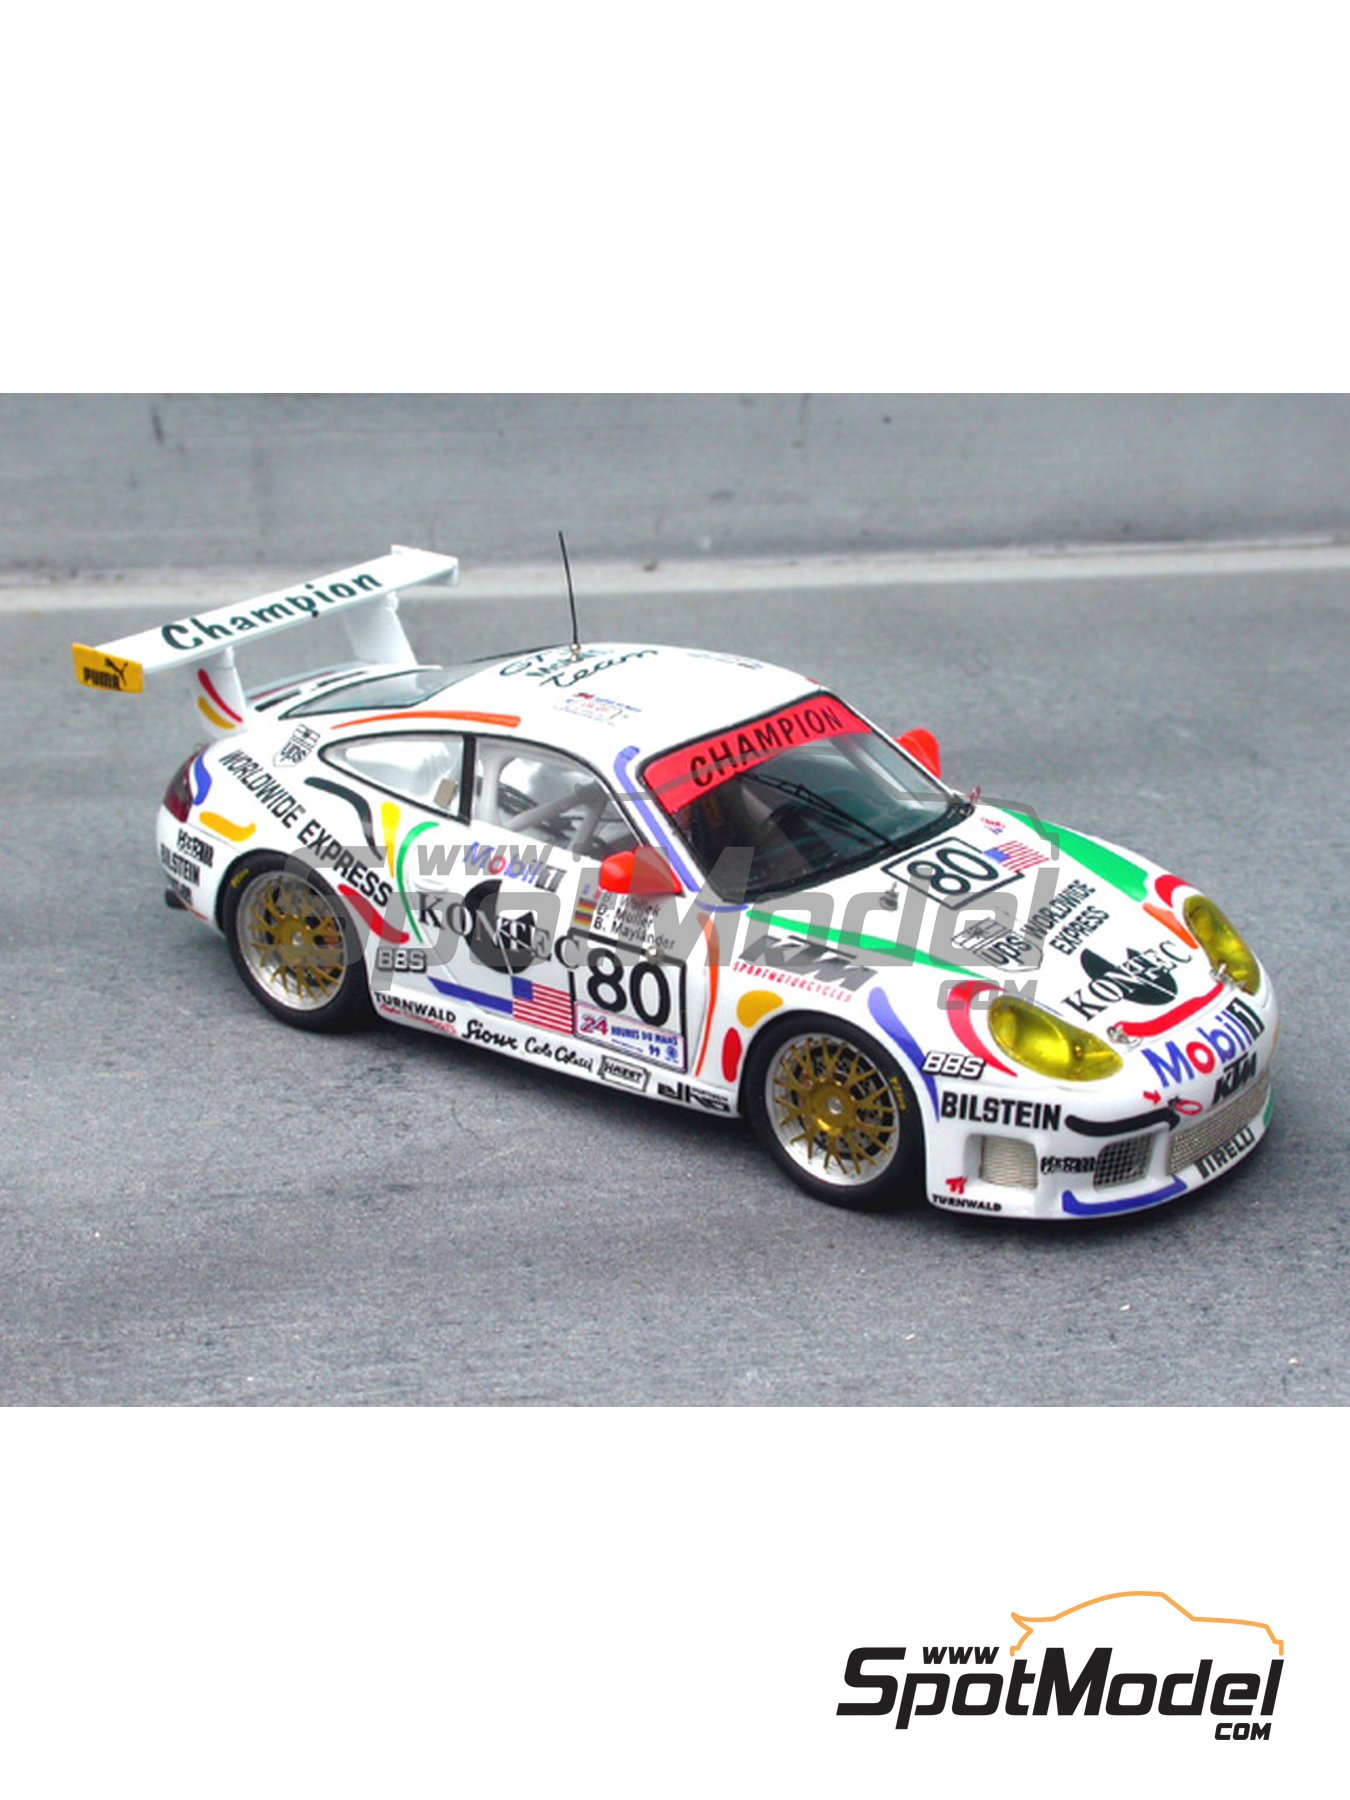 Porsche 911 996 GT3 Champion Racing Dave Maraj Team sponsored by Kontec -  24 Hours Le Mans 1999. Car scale model kit in 1/43 scale manufactured by Ren